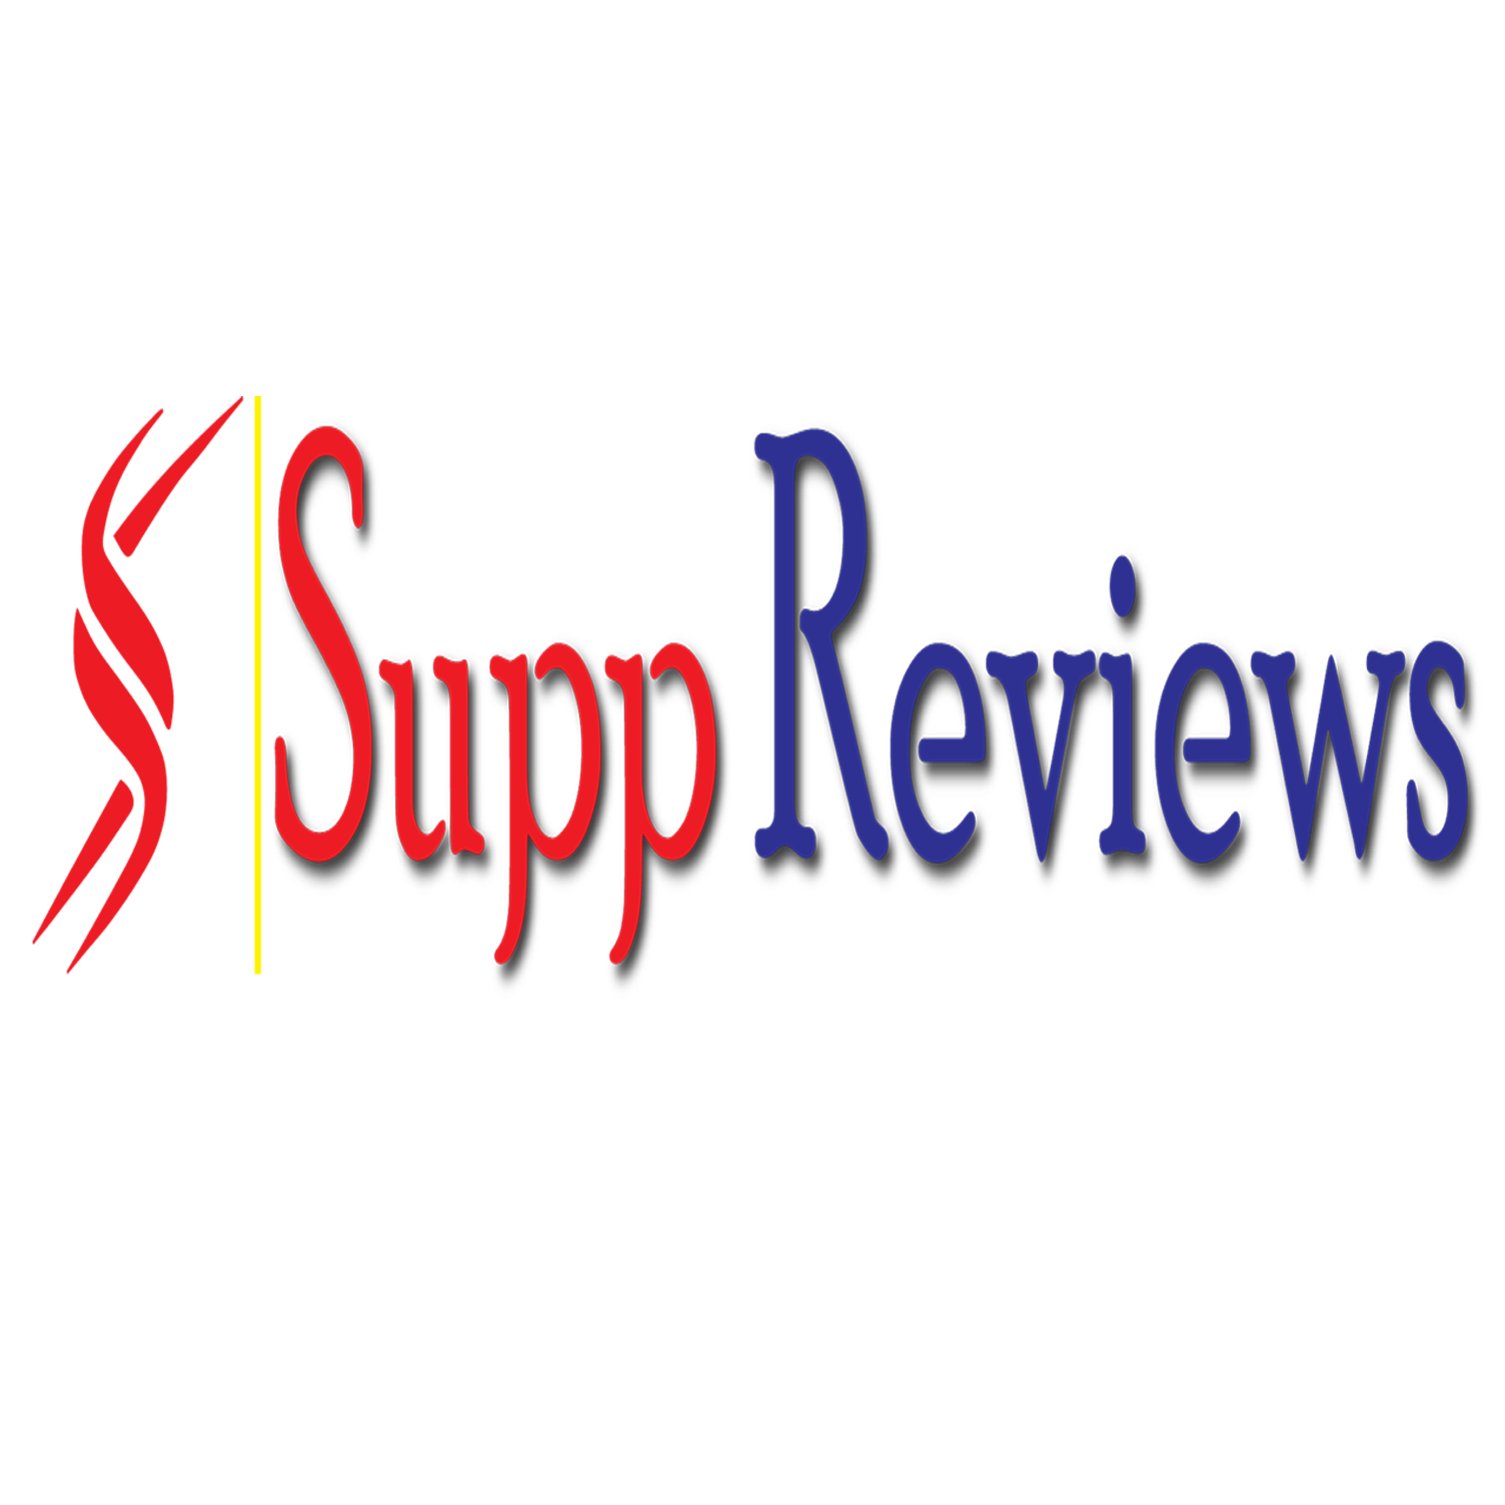 SuppReviews